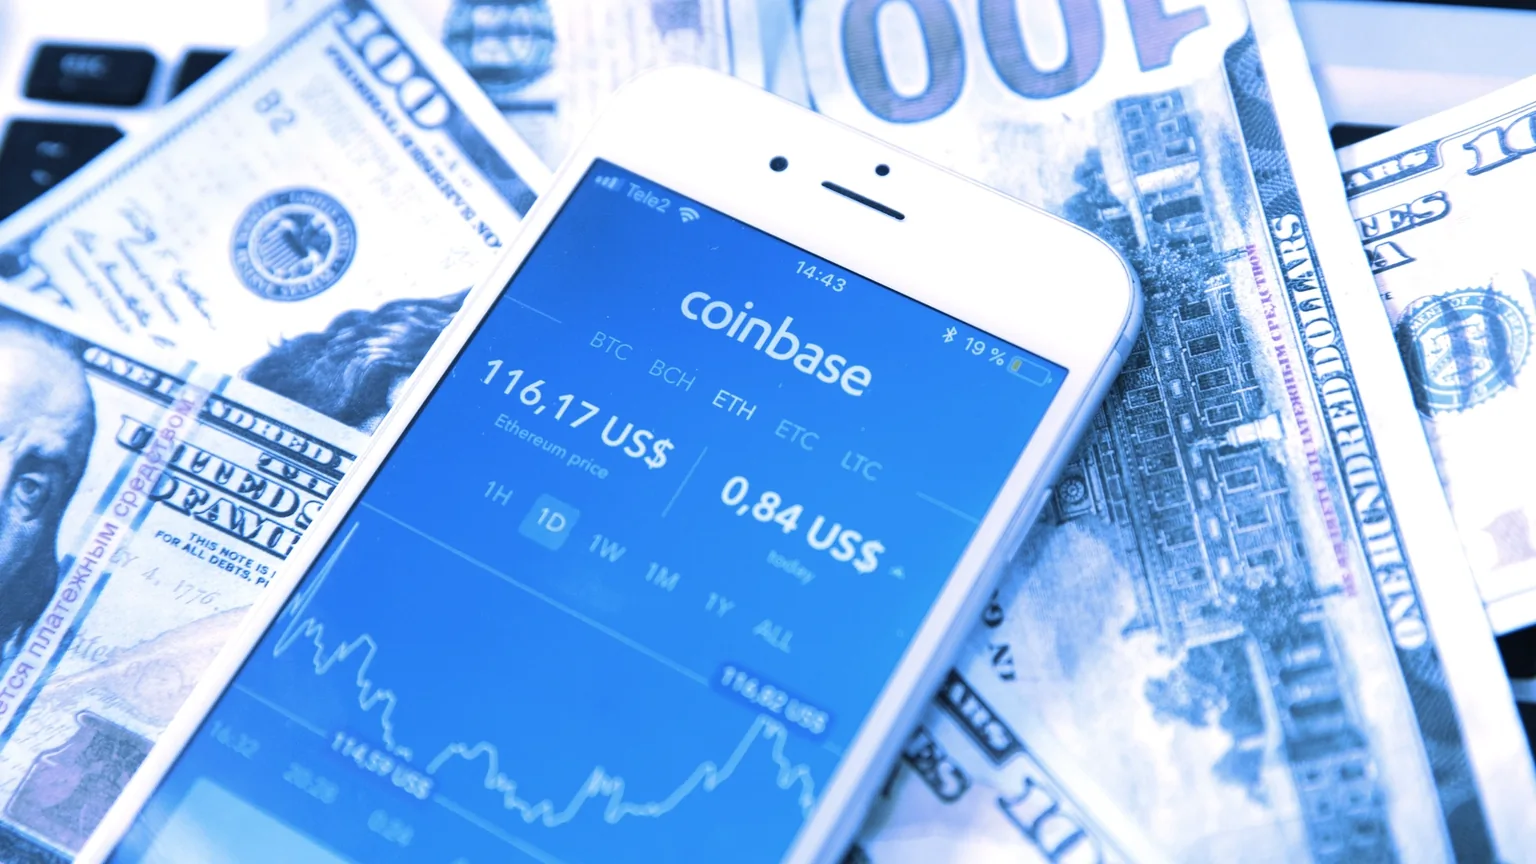 Coinbase. Image: Shutterstock